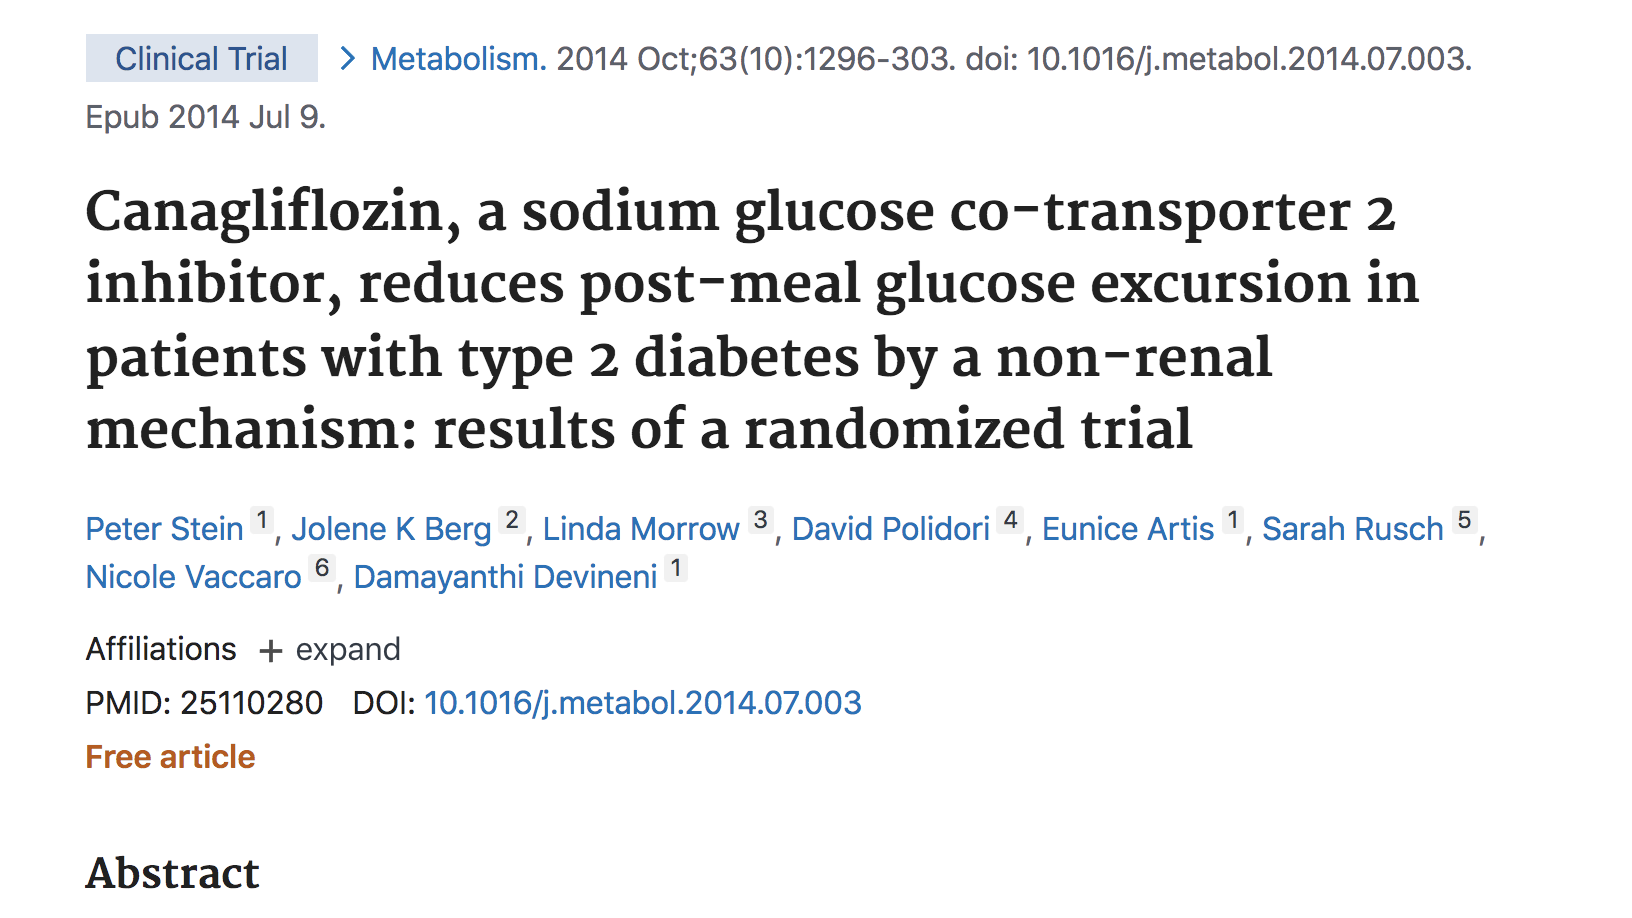 image of Canagliflozin, a sodium glucose co-transporter 2 inhibitor, reduces post-meal glucose excursion in patients with type 2 diabetes by a non-renal mechanism: results of a randomized trial.